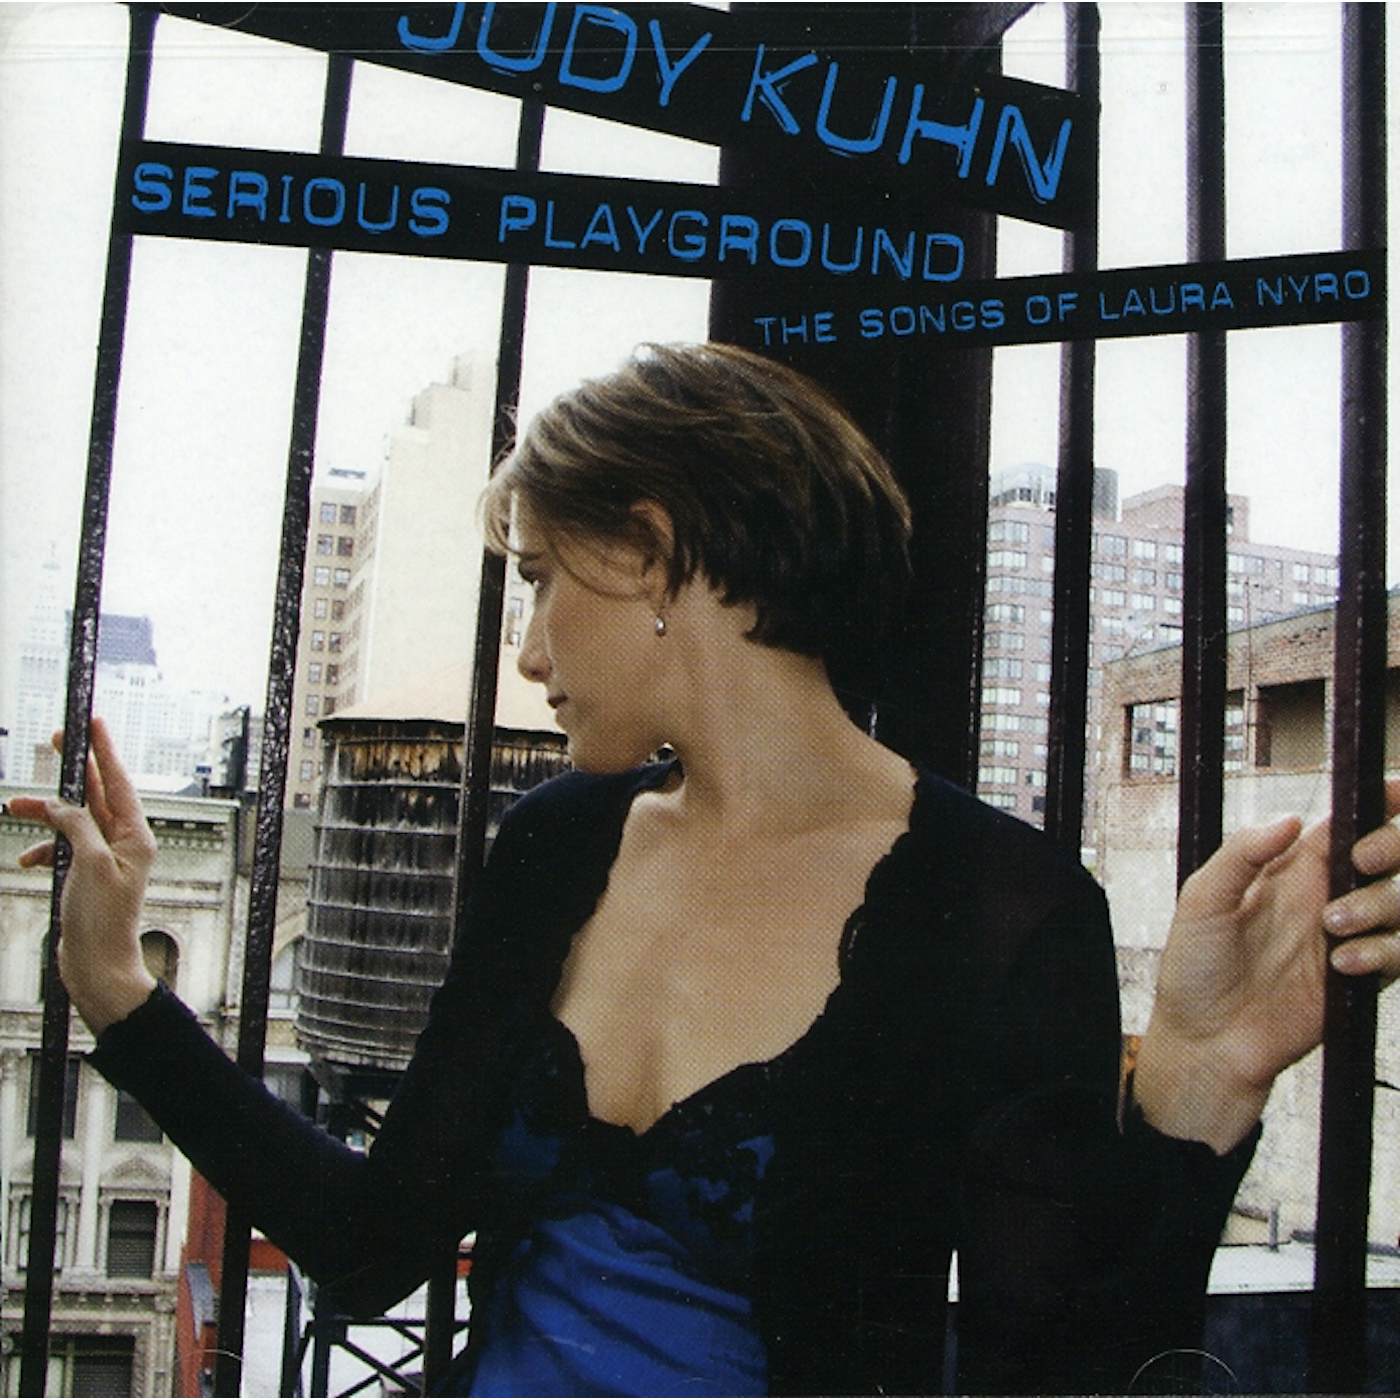 Judy Kuhn SERIOUS PLAYGROUND: THE SONGS OF LAURA NYRO CD